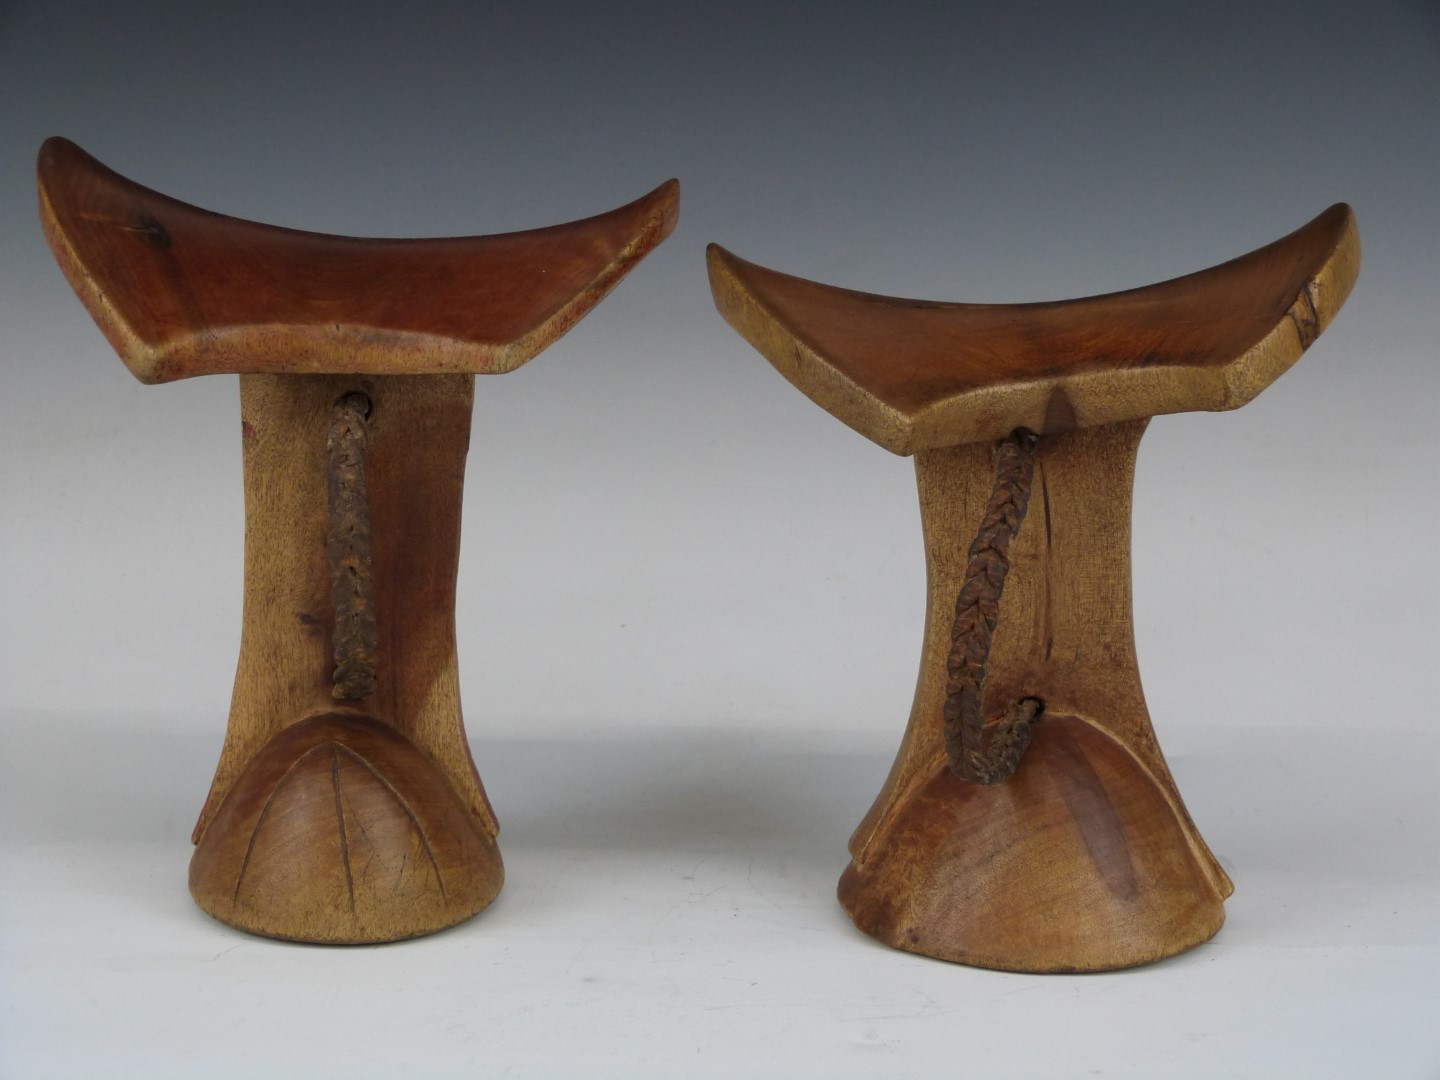 Two carved African tribal headrests with braided leather handles, Ileret, Latee Turkana region,